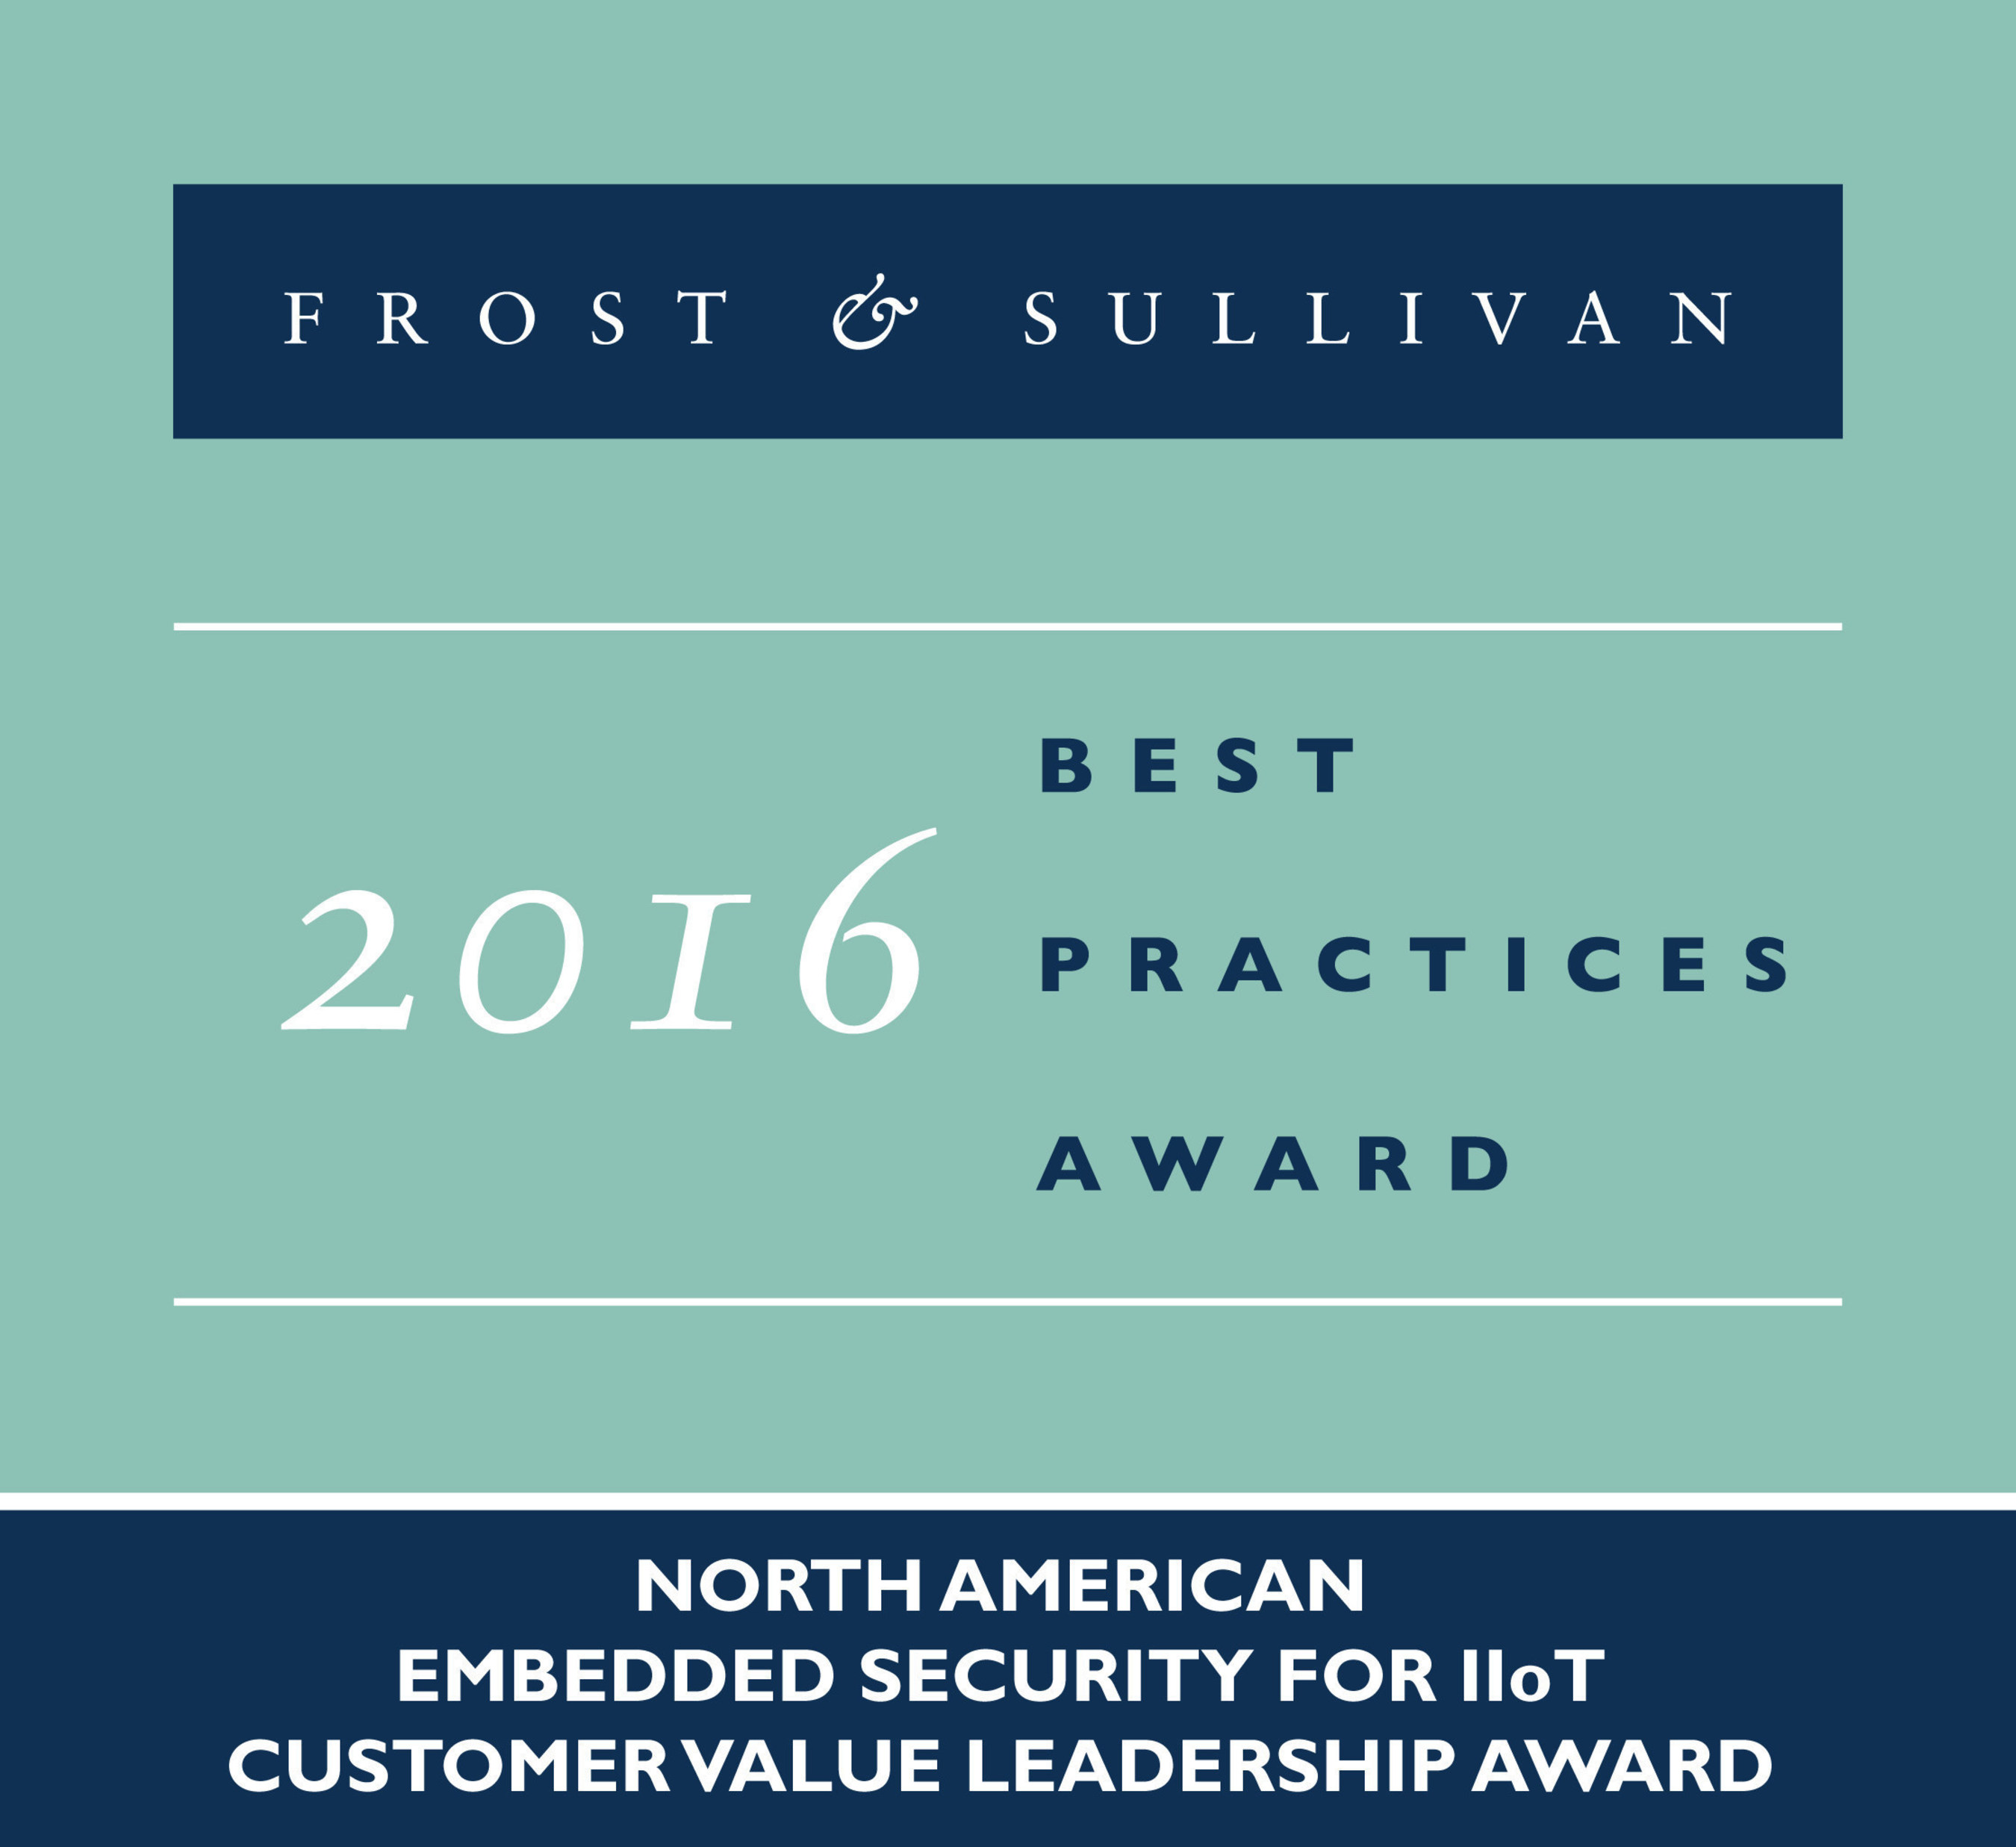 Symantec Corporation Receives 2016 North America Embedded Security for IIoT Customer Value Leadership Award